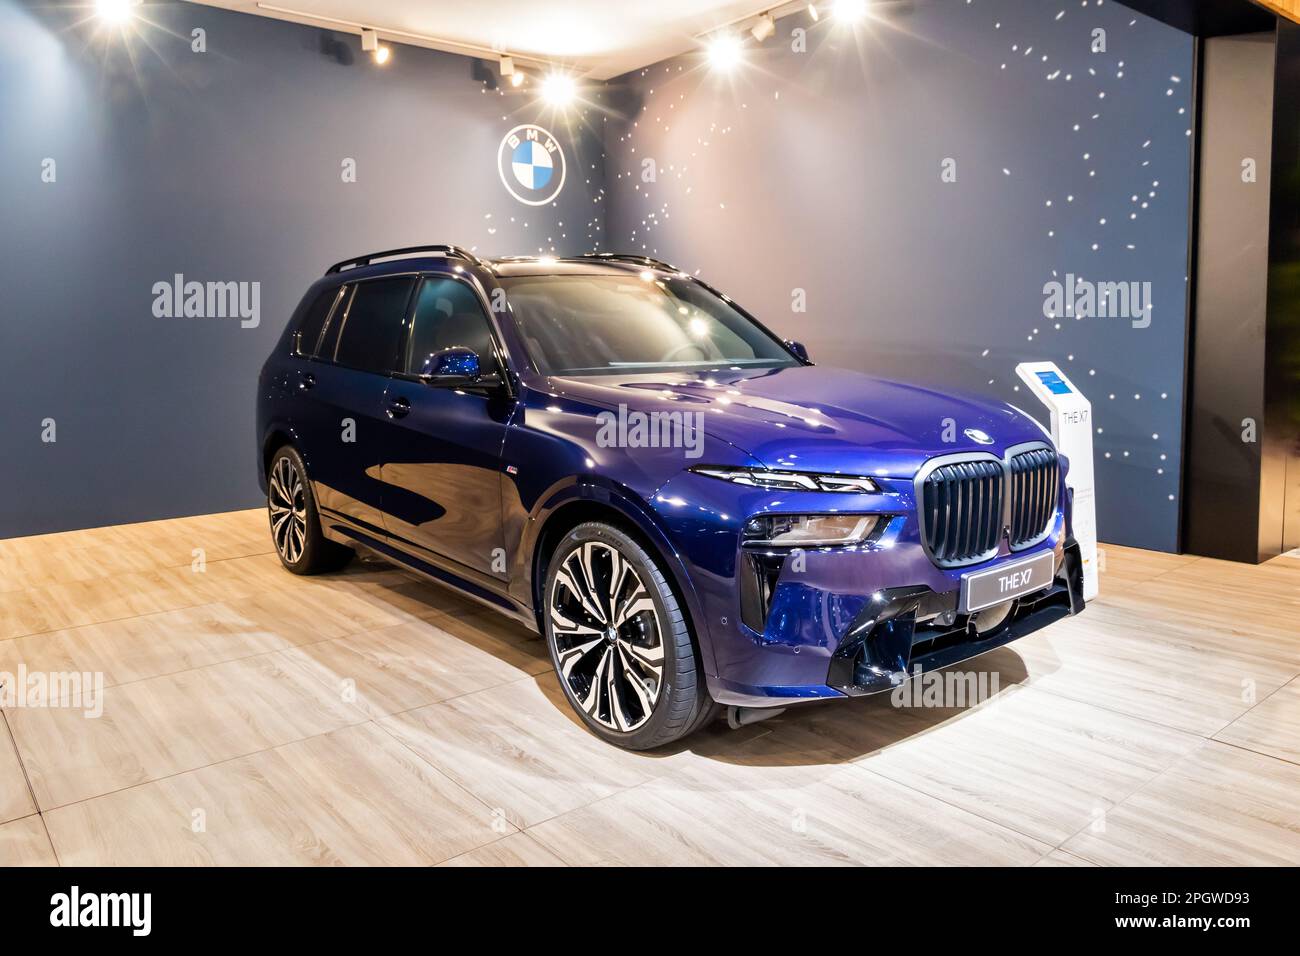 BMW X7 (G07) luxury SUV car presented at the Brussels Autosalon